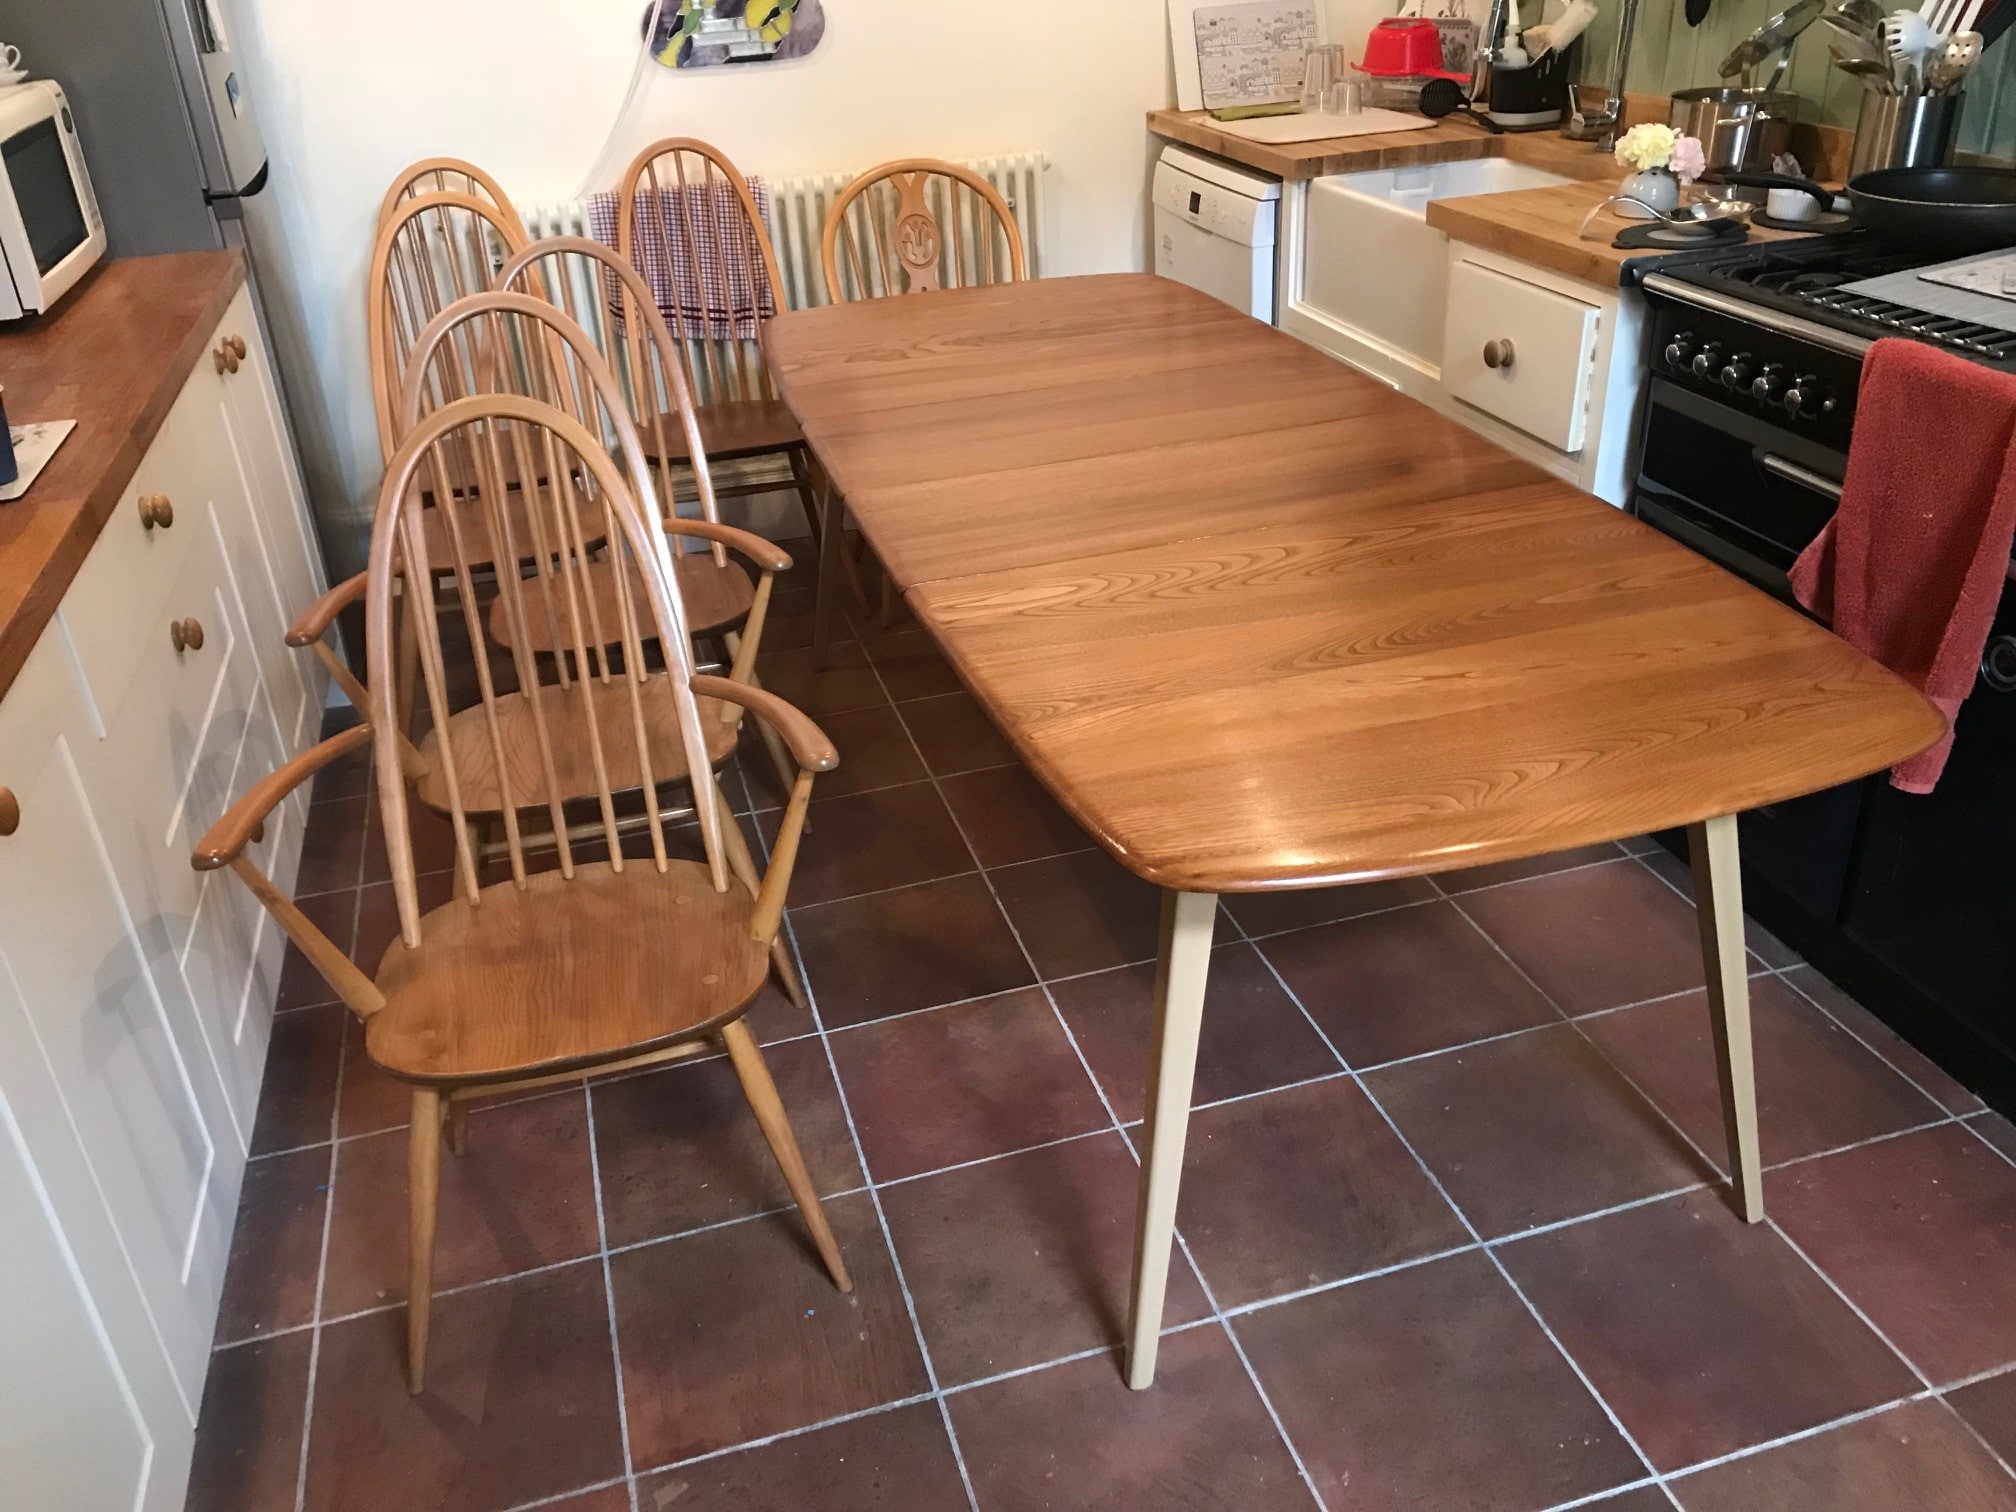 Chair and Ercol table after french polisher repair